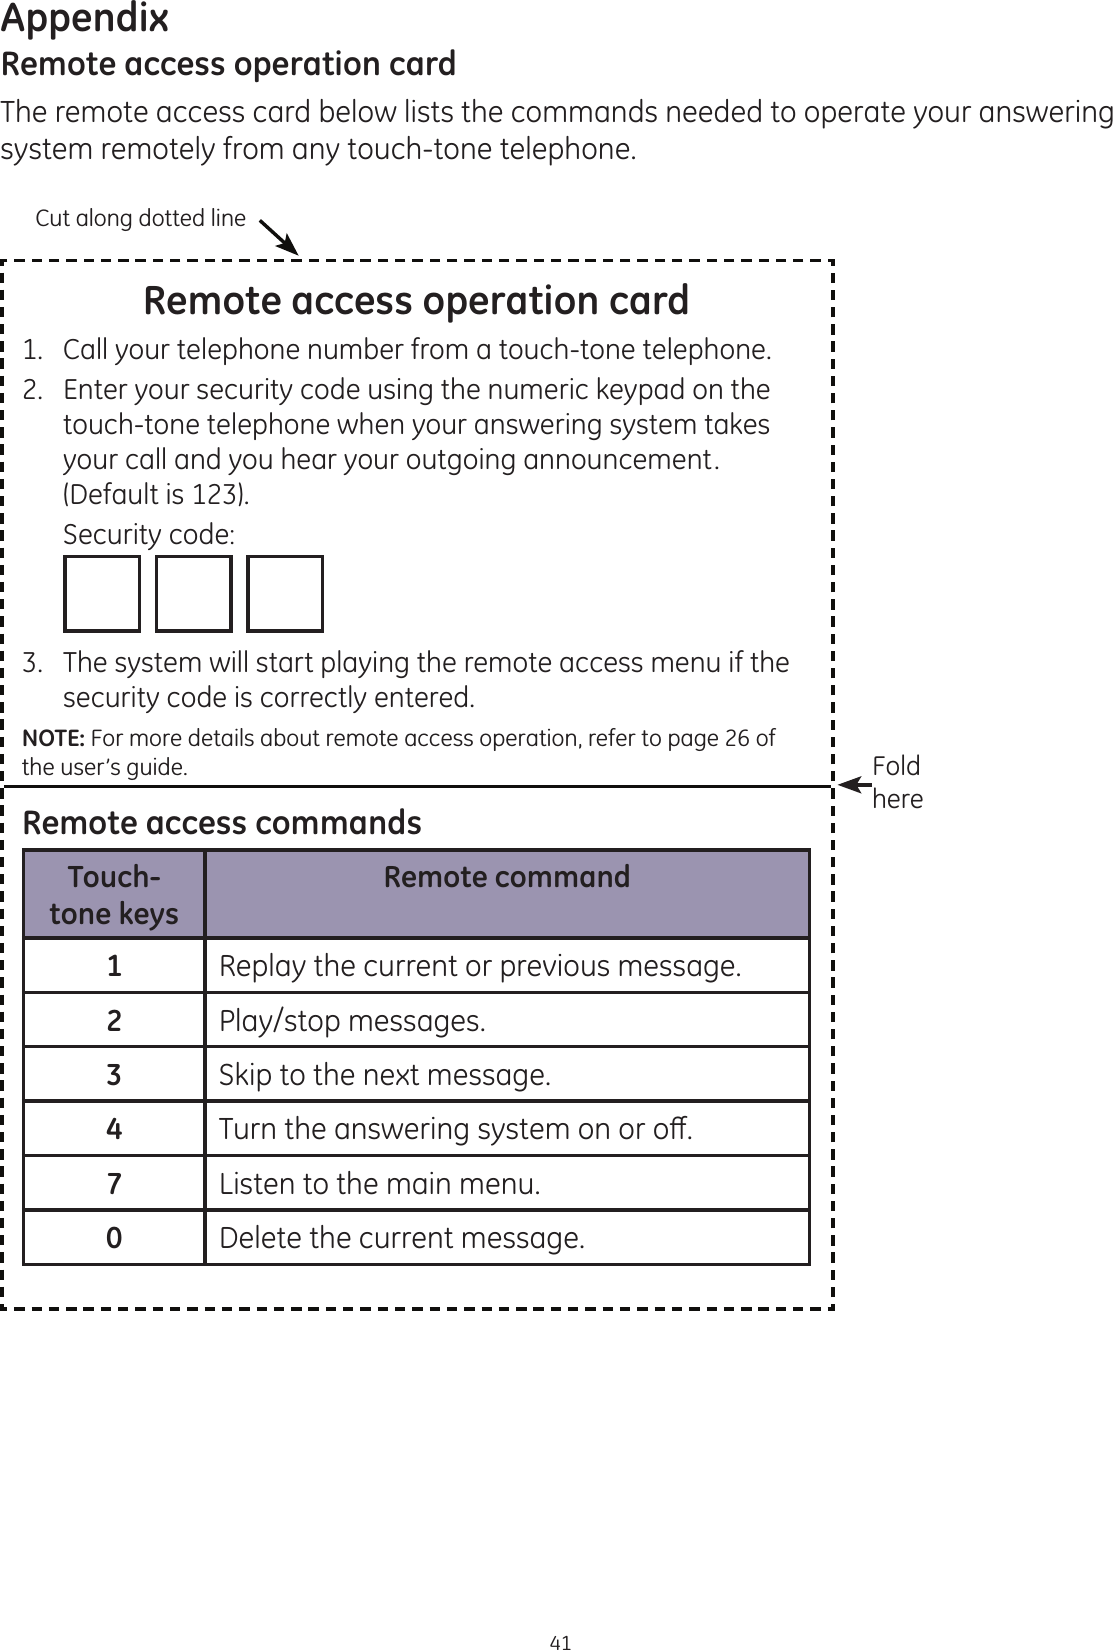 Appendix41Remote access operation cardThe remote access card below lists the commands needed to operate your answering system remotely from any touch-tone telephone. Remote access operation card1.   Call your telephone number from a touch-tone telephone.2.   Enter your security code using the numeric keypad on the touch-tone telephone when your answering system takes your call and you hear your outgoing announcement. (Default is 123).  Security code:                  3.  The system will start playing the remote access menu if the security code is correctly entered.NOTE: For more details about remote access operation, refer to page 26 of the user’s guide.Remote access commandsTouch-tone keysRemote command1Replay the current or previous message.2Play/stop messages.3Skip to the next message.47XUQWKHDQVZHULQJV\VWHPRQRURȺ7Listen to the main menu.0Delete the current message.Cut along dotted lineFold here